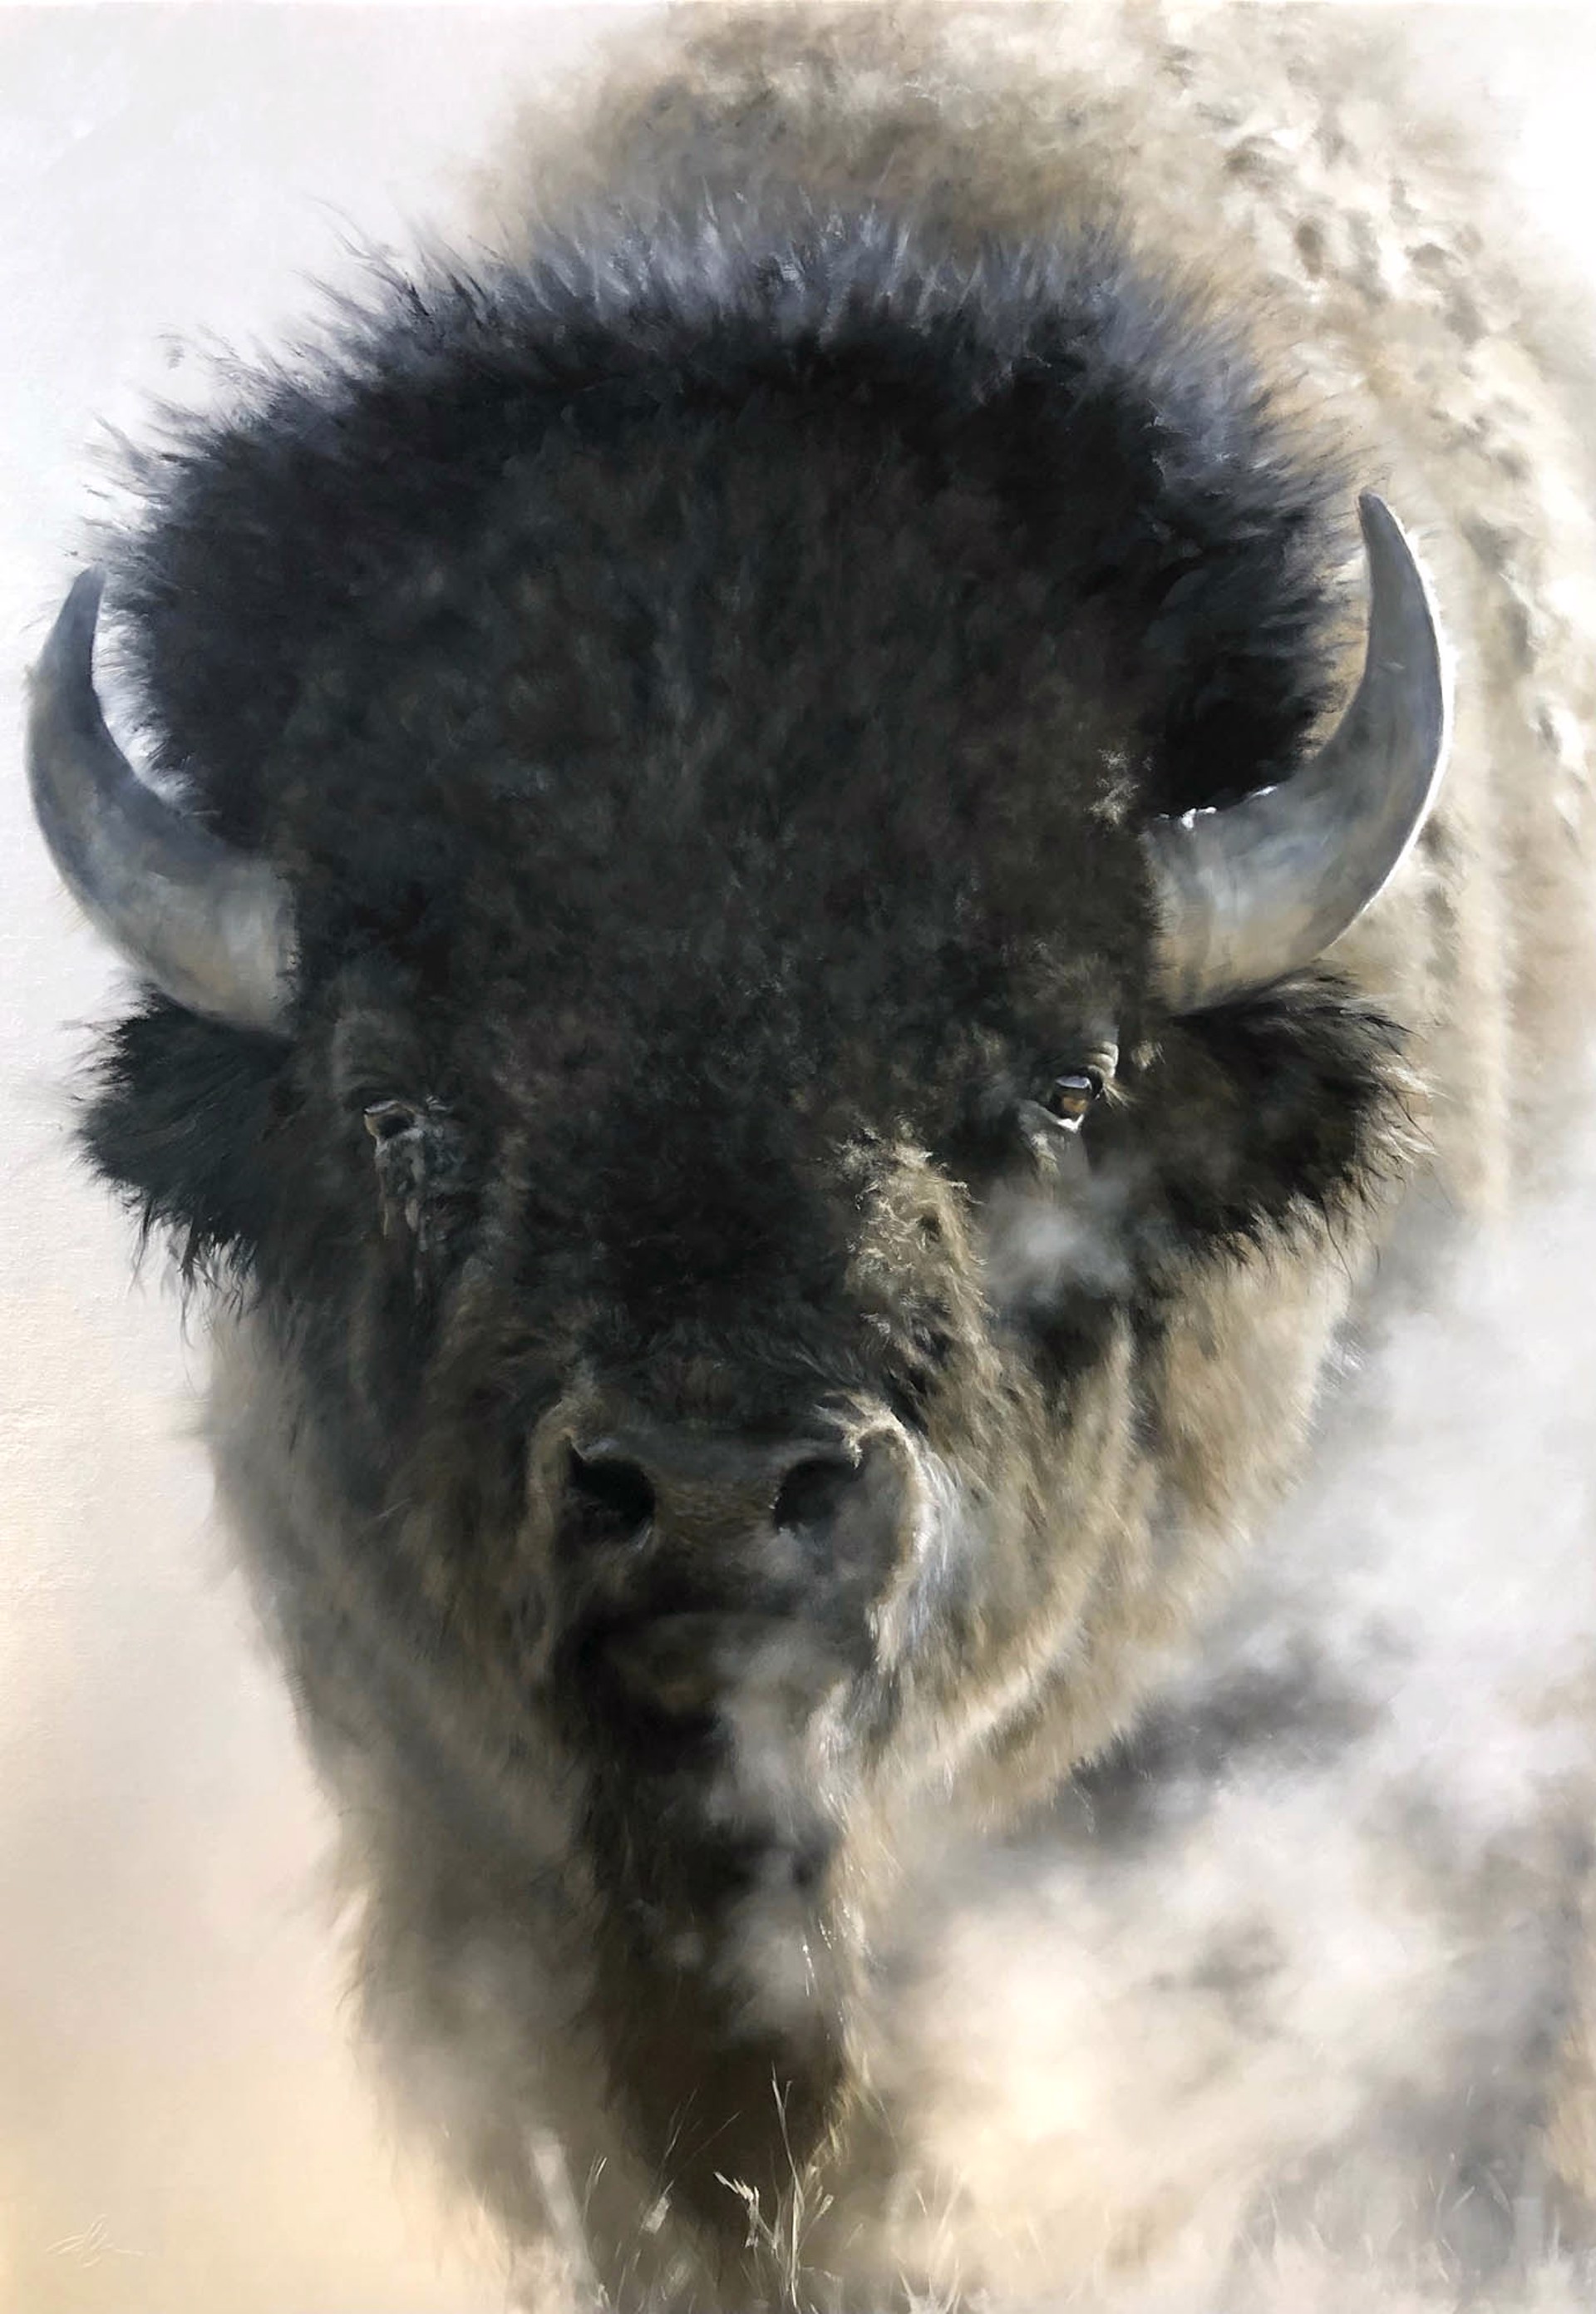 Original Oil Painting By Doyle Hostetler Of An Upclose Bison In Muted Color Tones